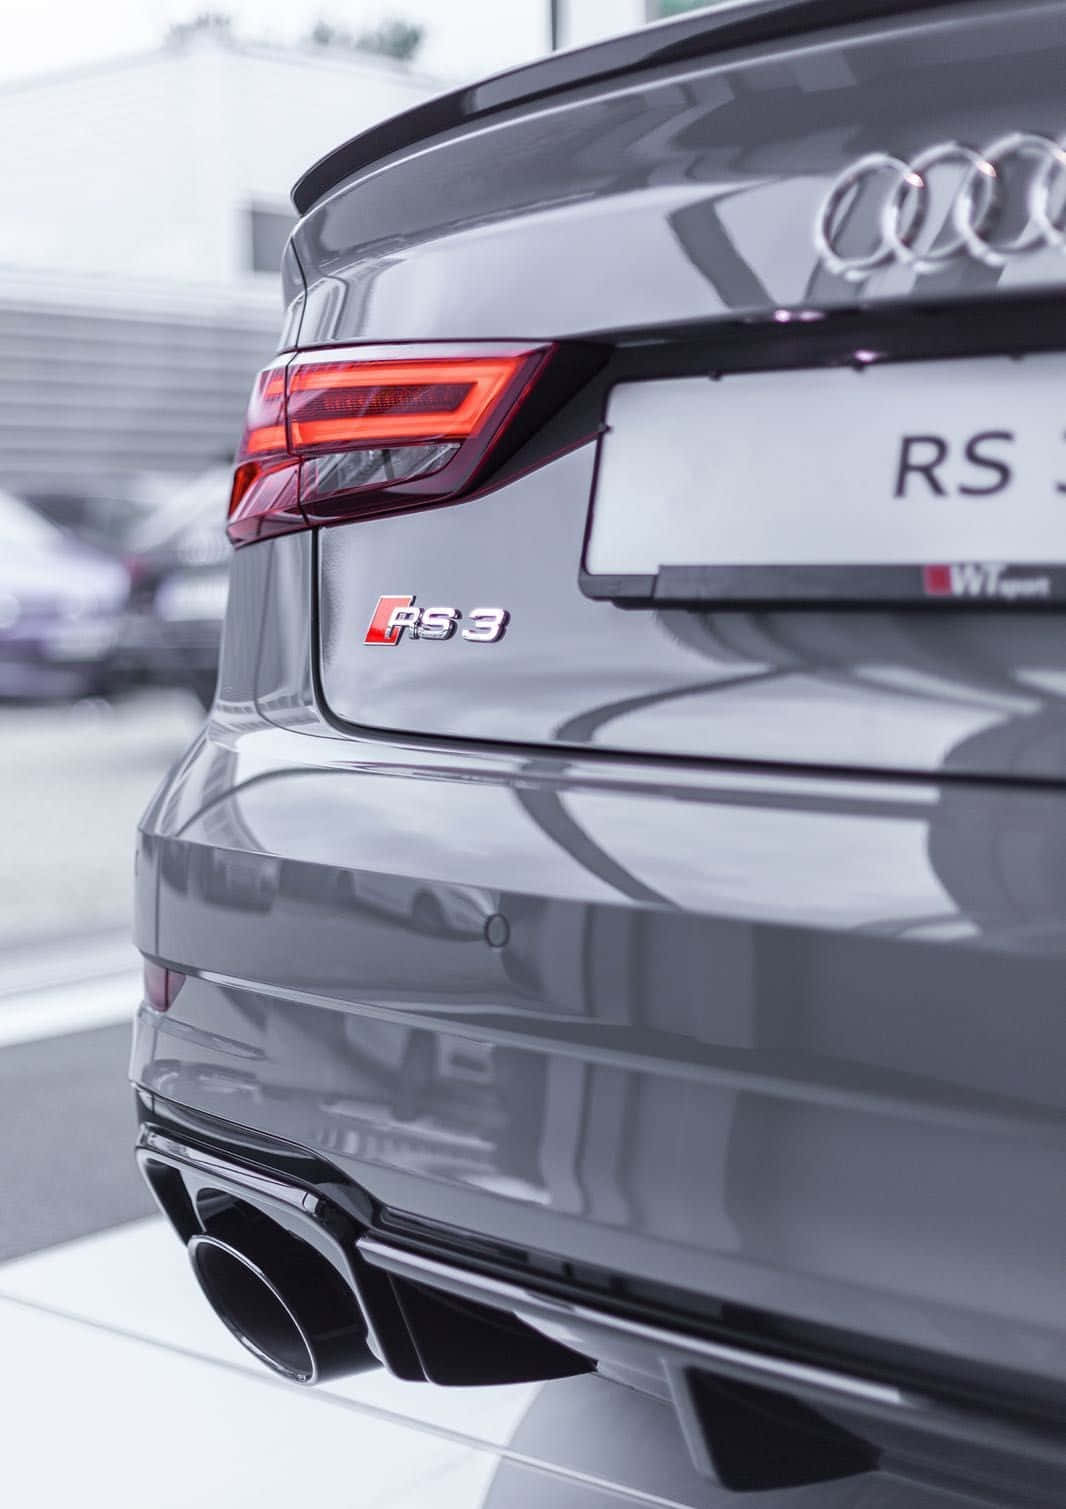 Caption: Audi RS3 - Dynamic Performance on the Road Wallpaper